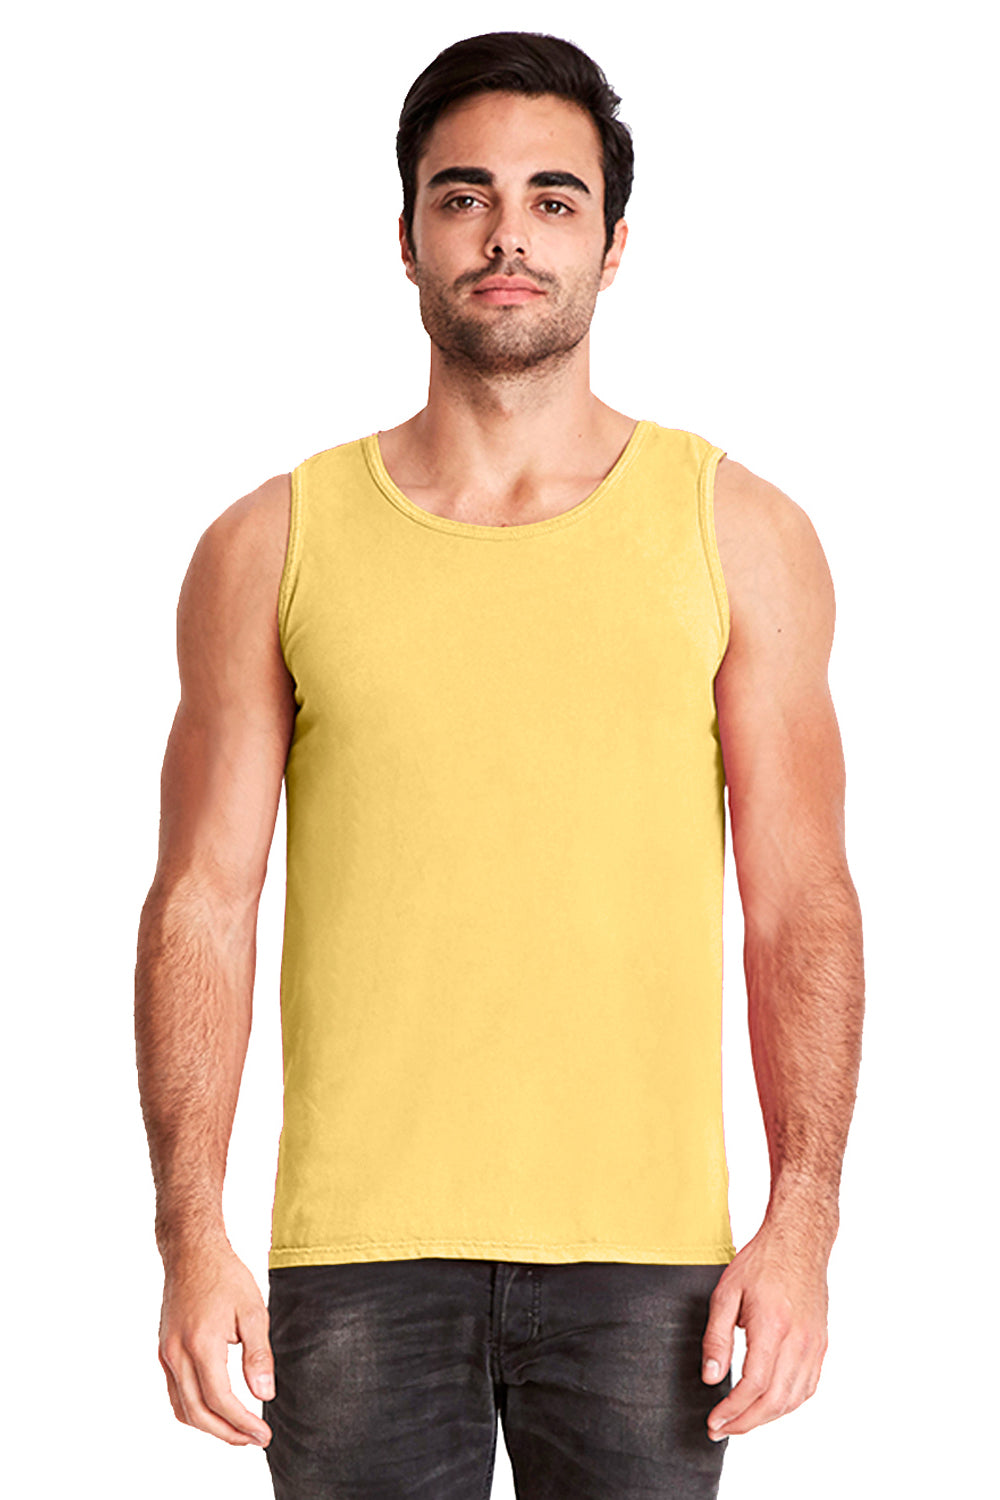 Next Level 7433 Mens Inspired Dye Tank Top Blonde Yellow Front